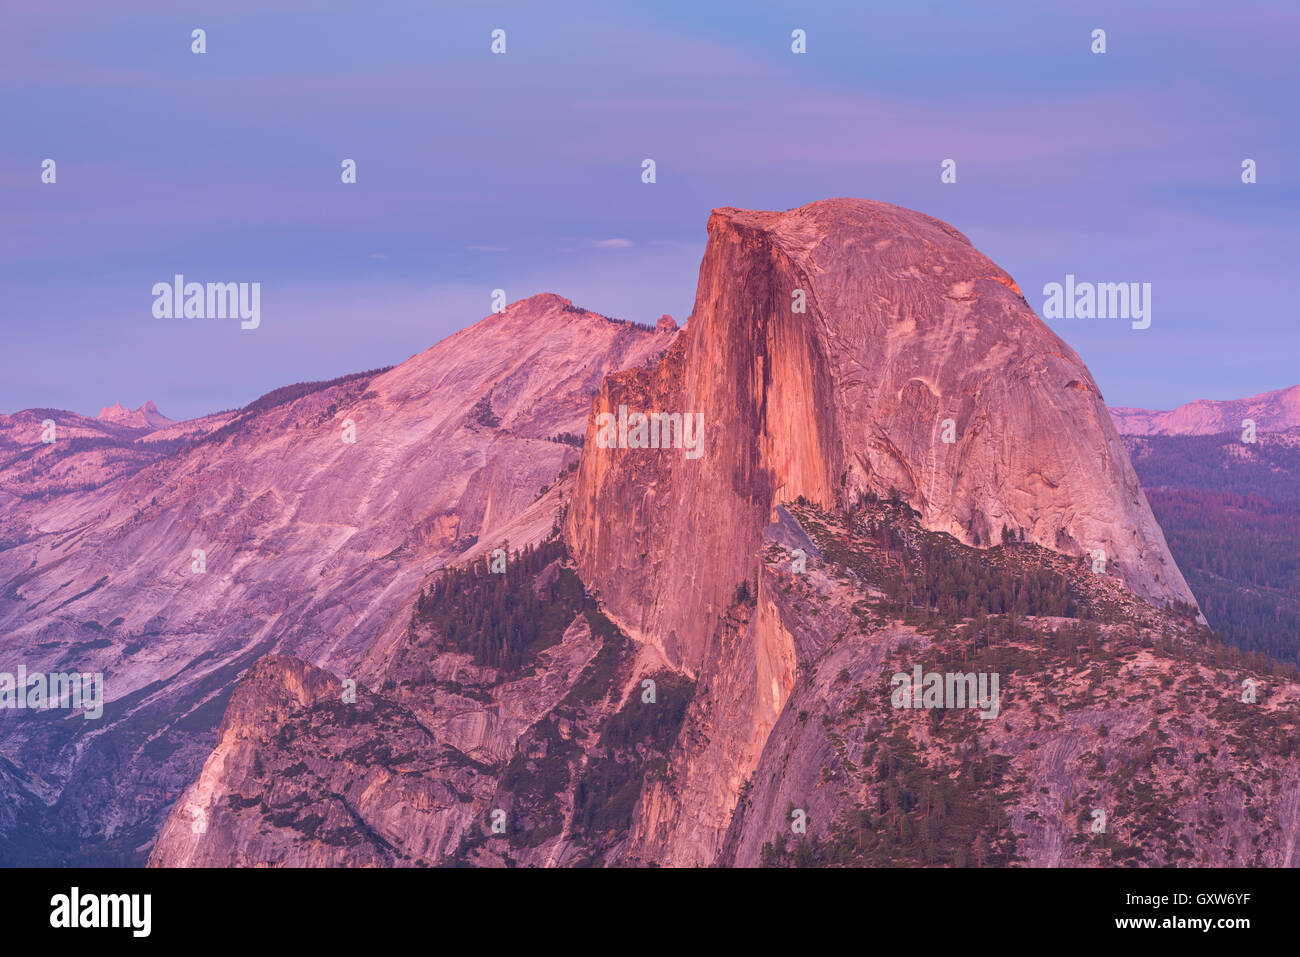 Last light glowing on the face of Half Dome from Glacier Polint, Yosemite Valley, California, USA. Stock Photo